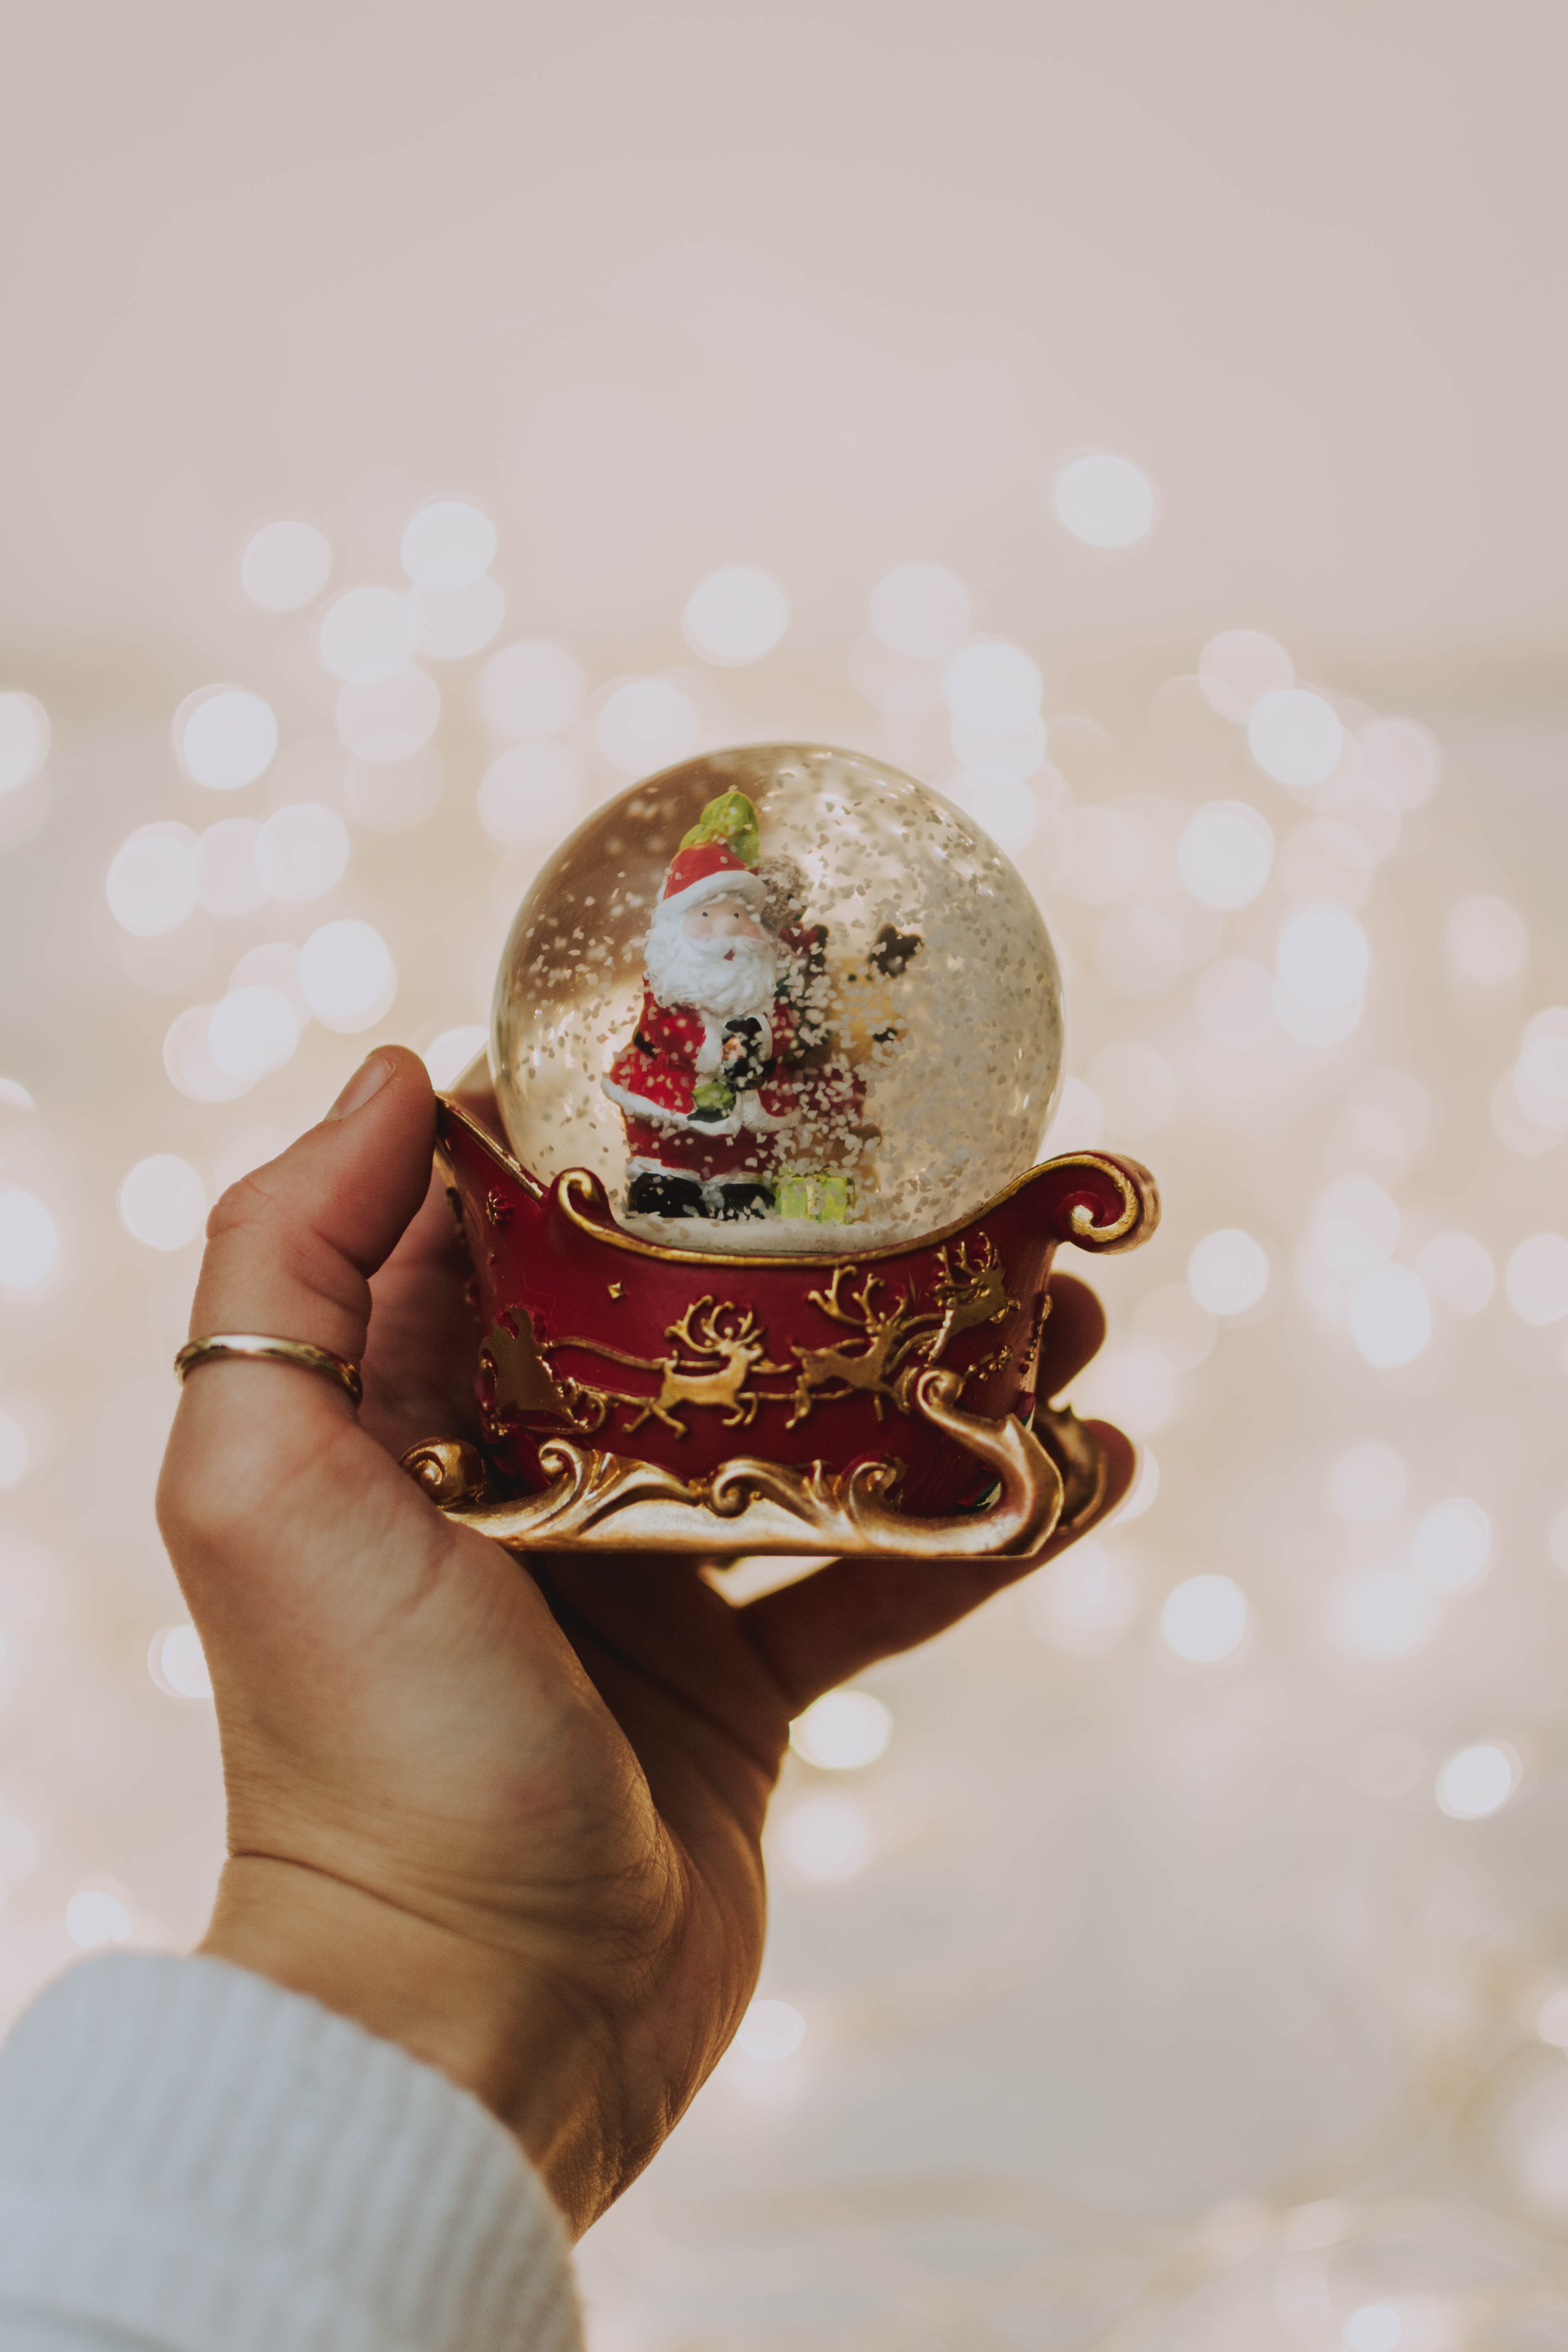 new year, santa claus, toy, holidays, glass, ball